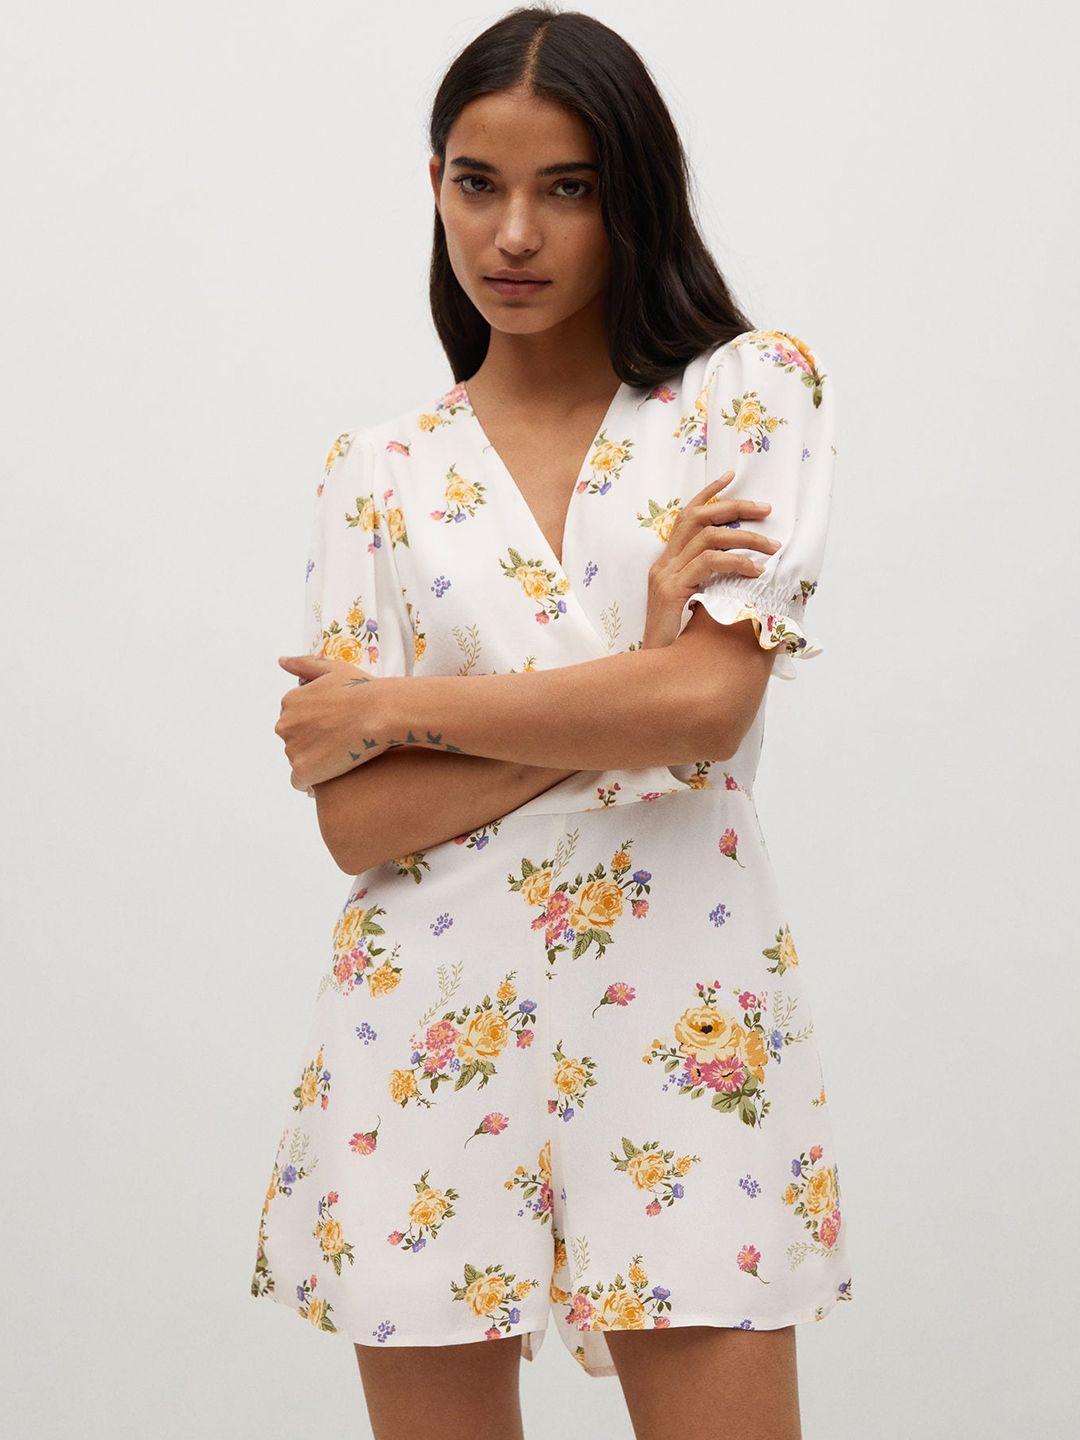 MANGO White & Yellow Floral Printed Playpsuit Price in India